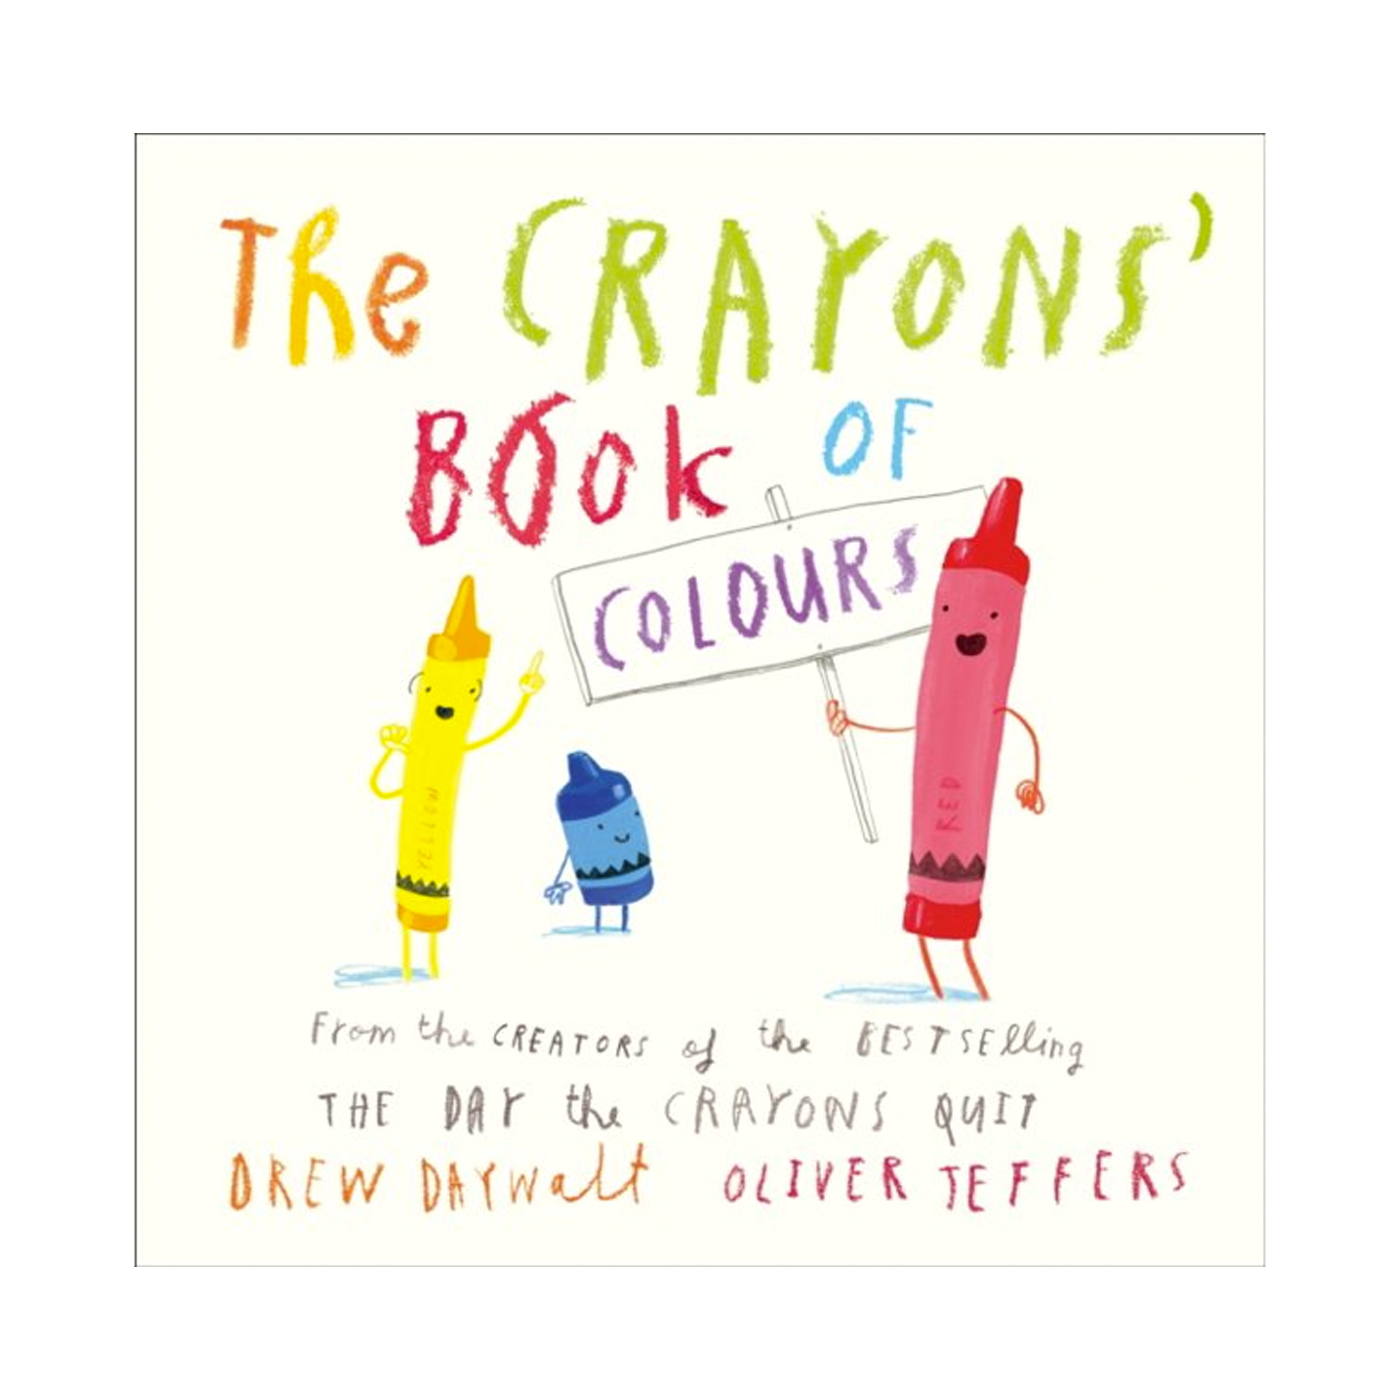  The Crayons' Book of Colours